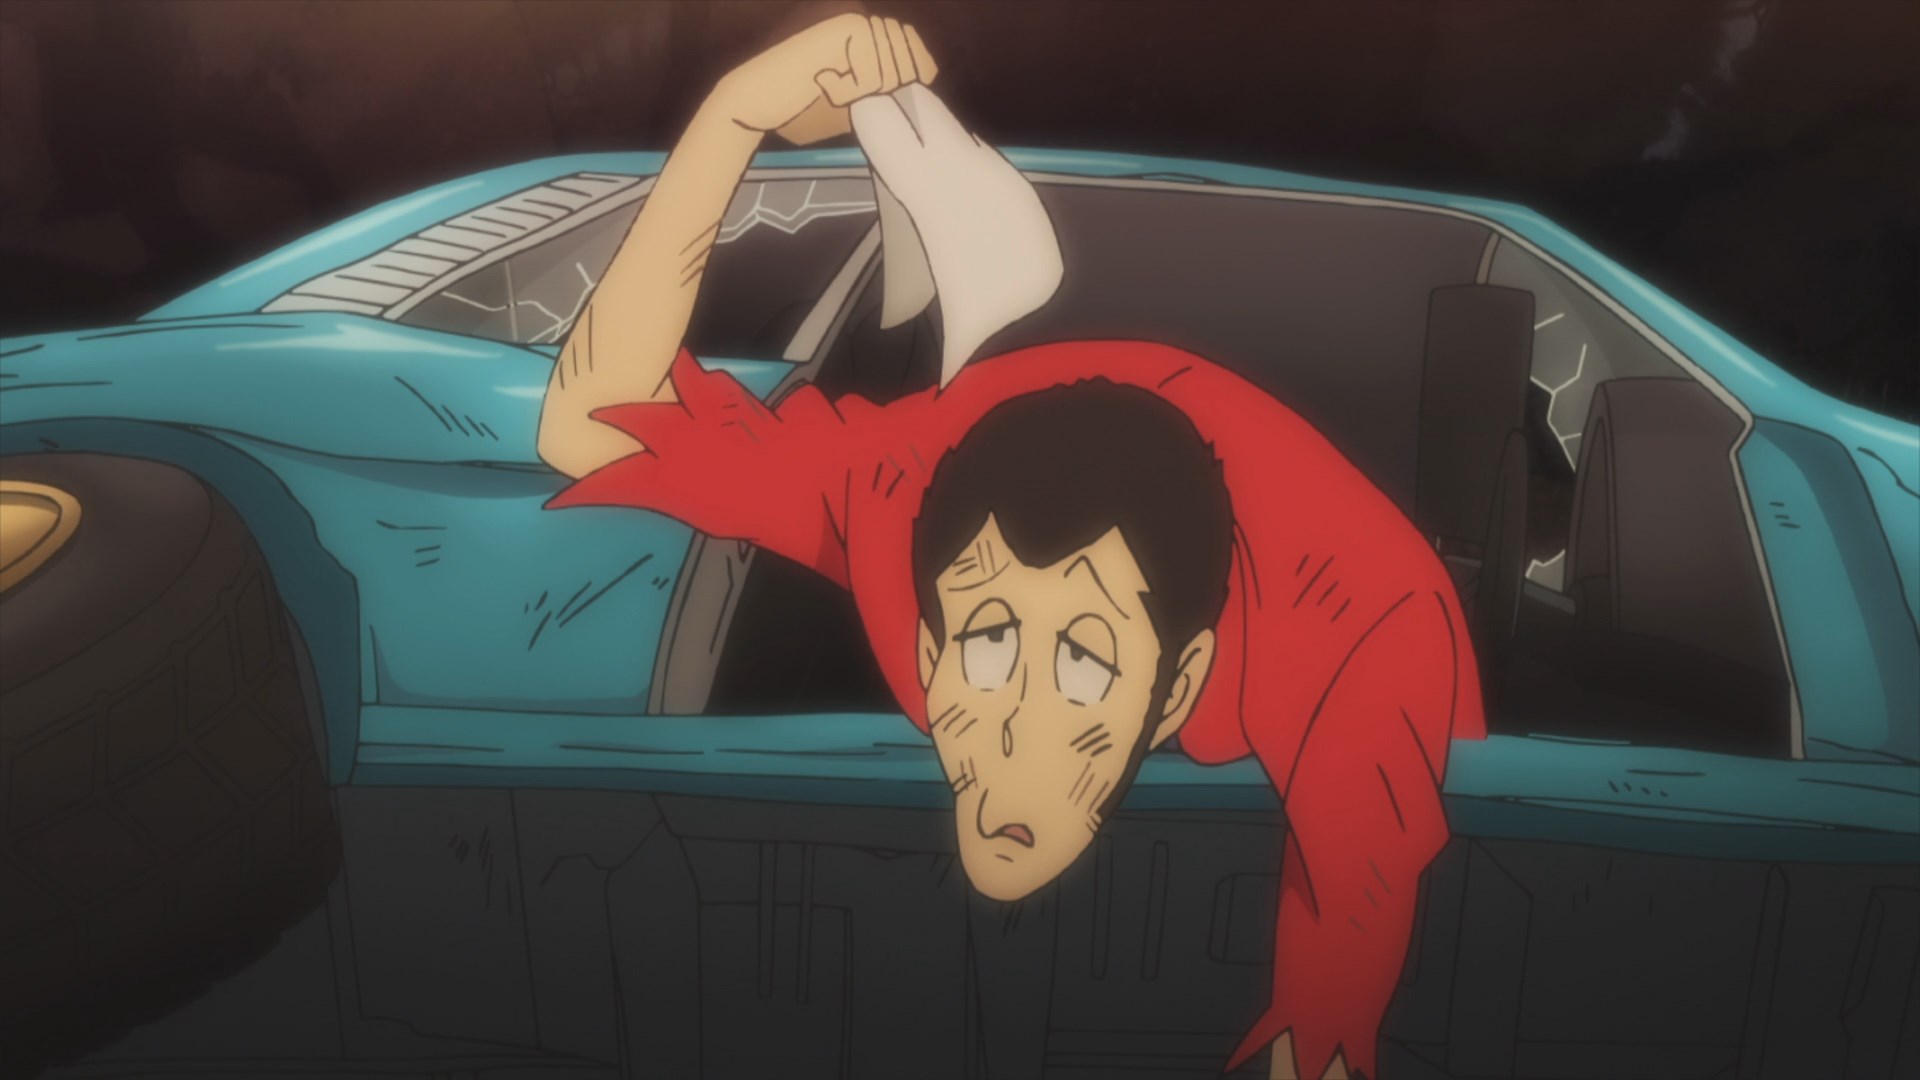 Lupin the Third Part 5 - 12